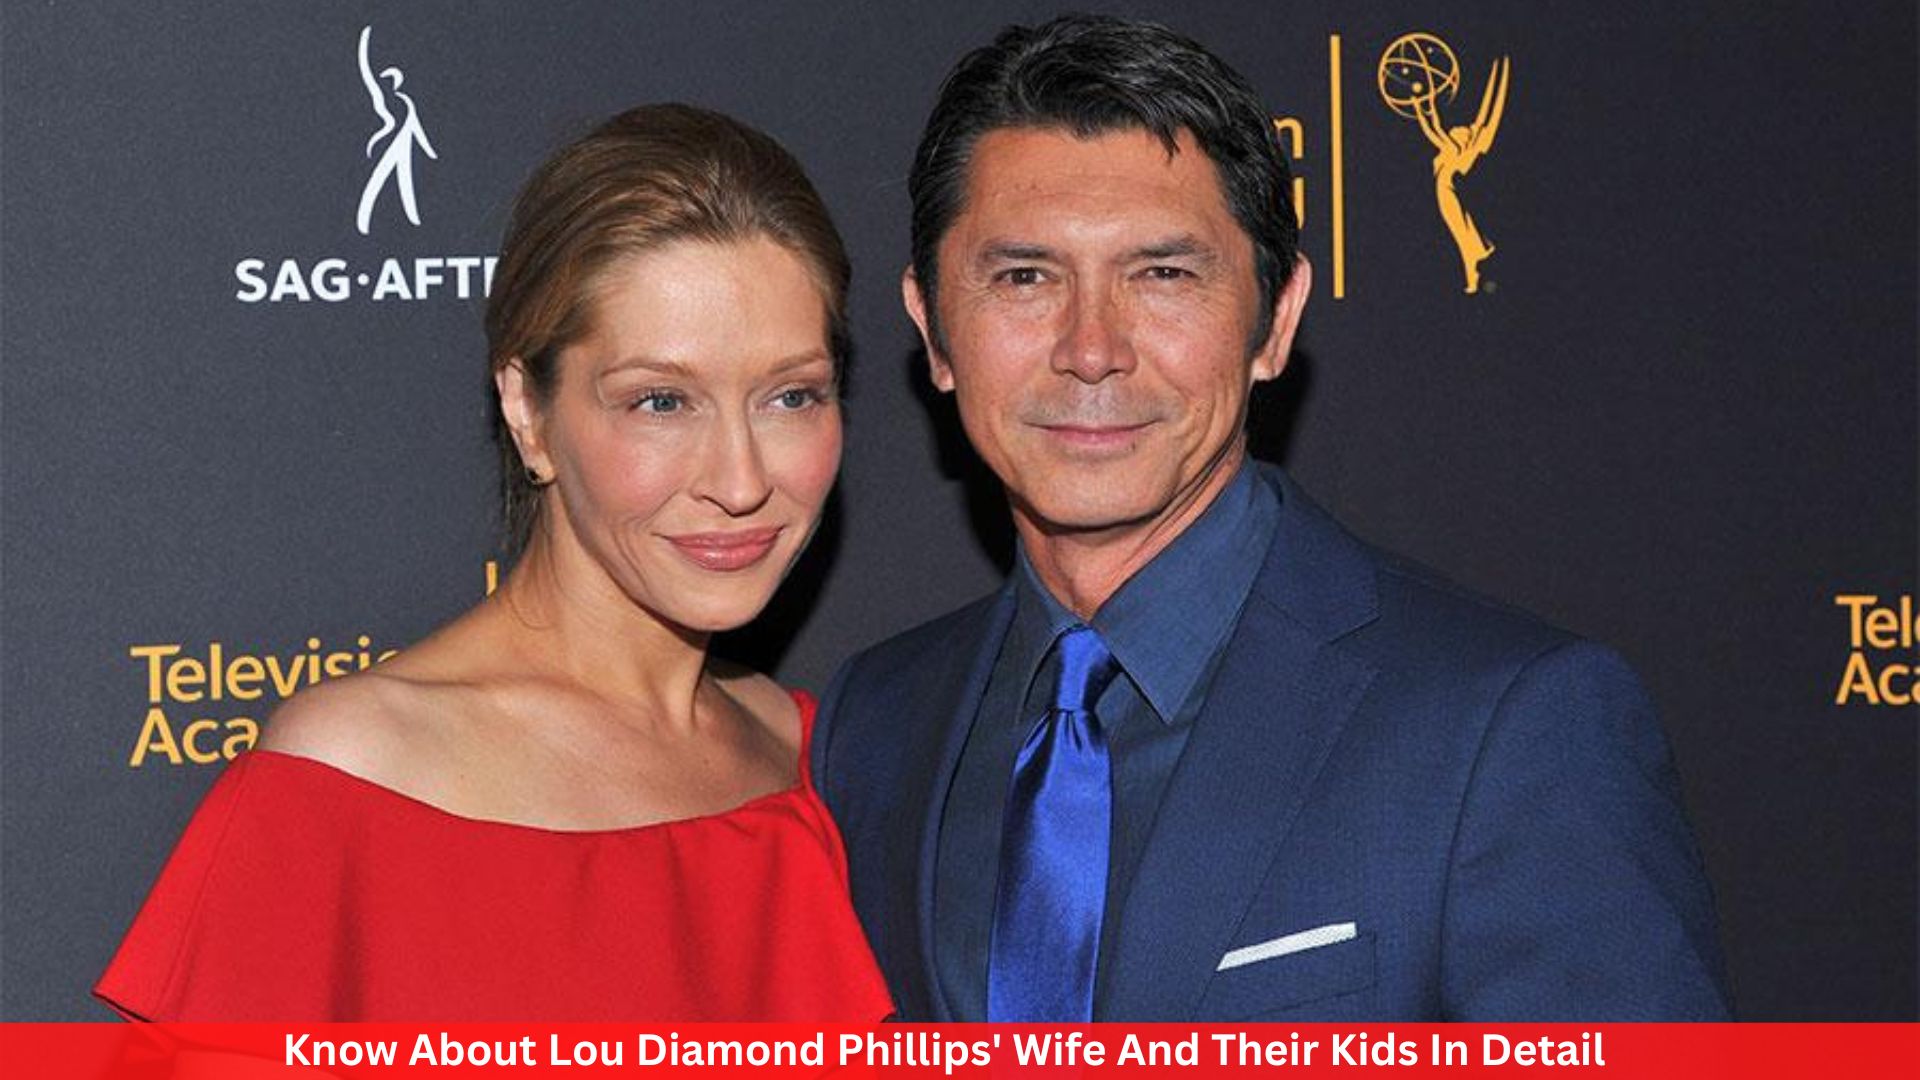 Know About Lou Diamond Phillips' Wife And Their Kids In Detail